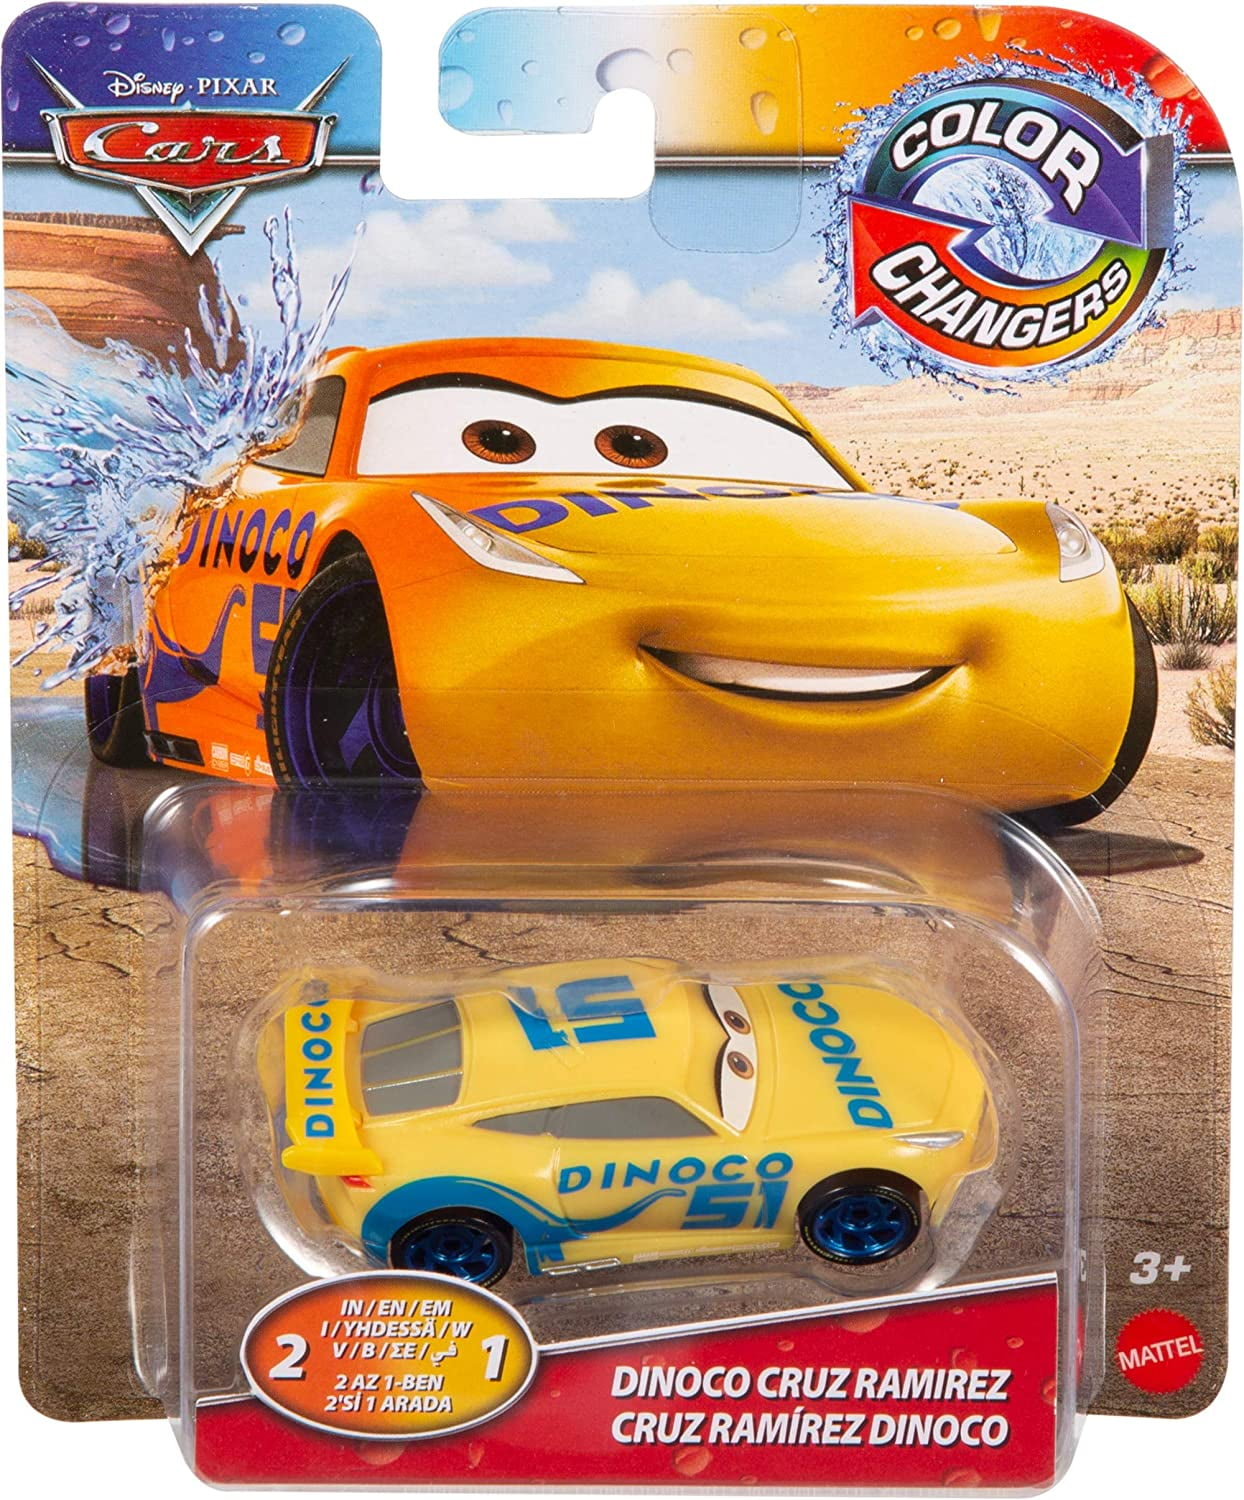 Disney And Pixar Cars Color Changers Collection Toy Cars Change Color With Water 7019d751 7247 4a18 88cd D4f8d38bdea3.724735a8fed2aa8bee76730dd45bc4fc 